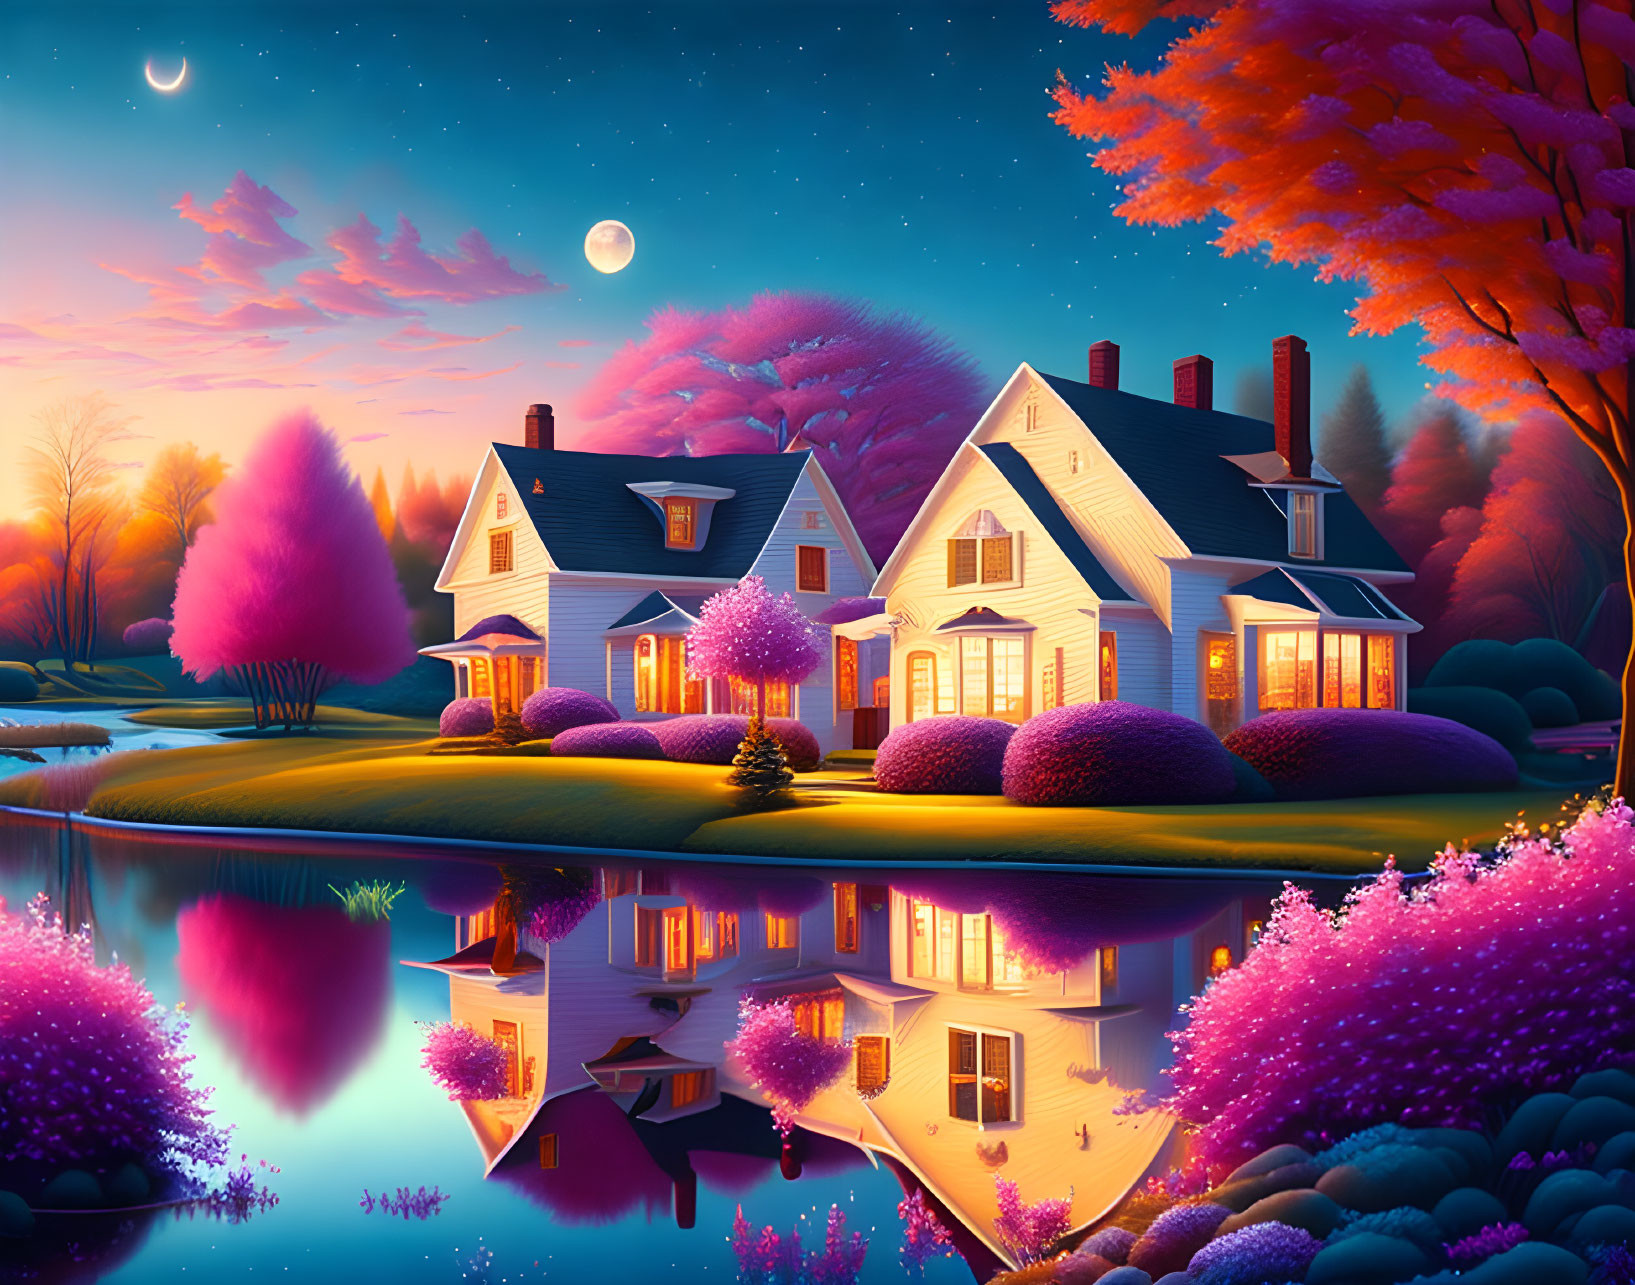 Colorful lakeside house surrounded by blooming trees under twilight sky